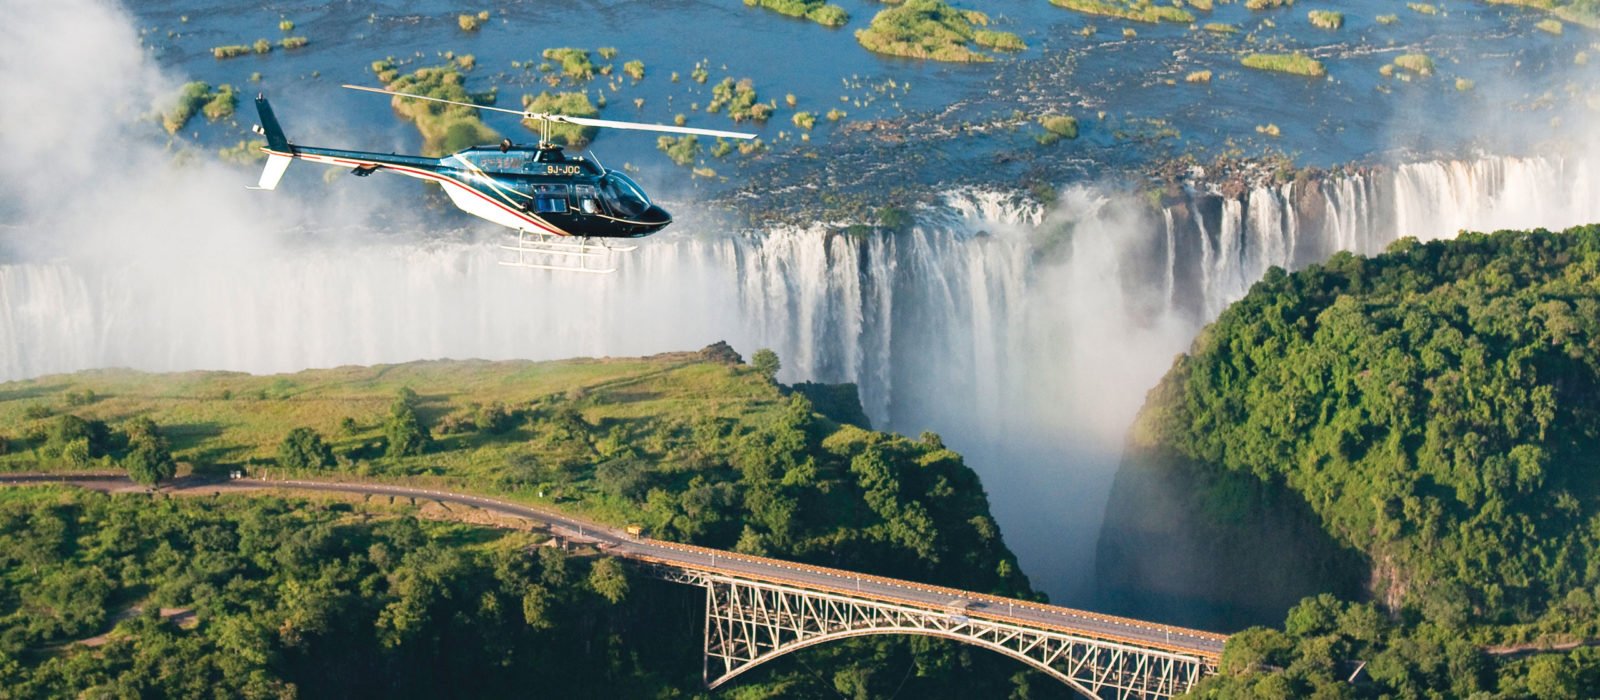 is november a good time to visit zambia